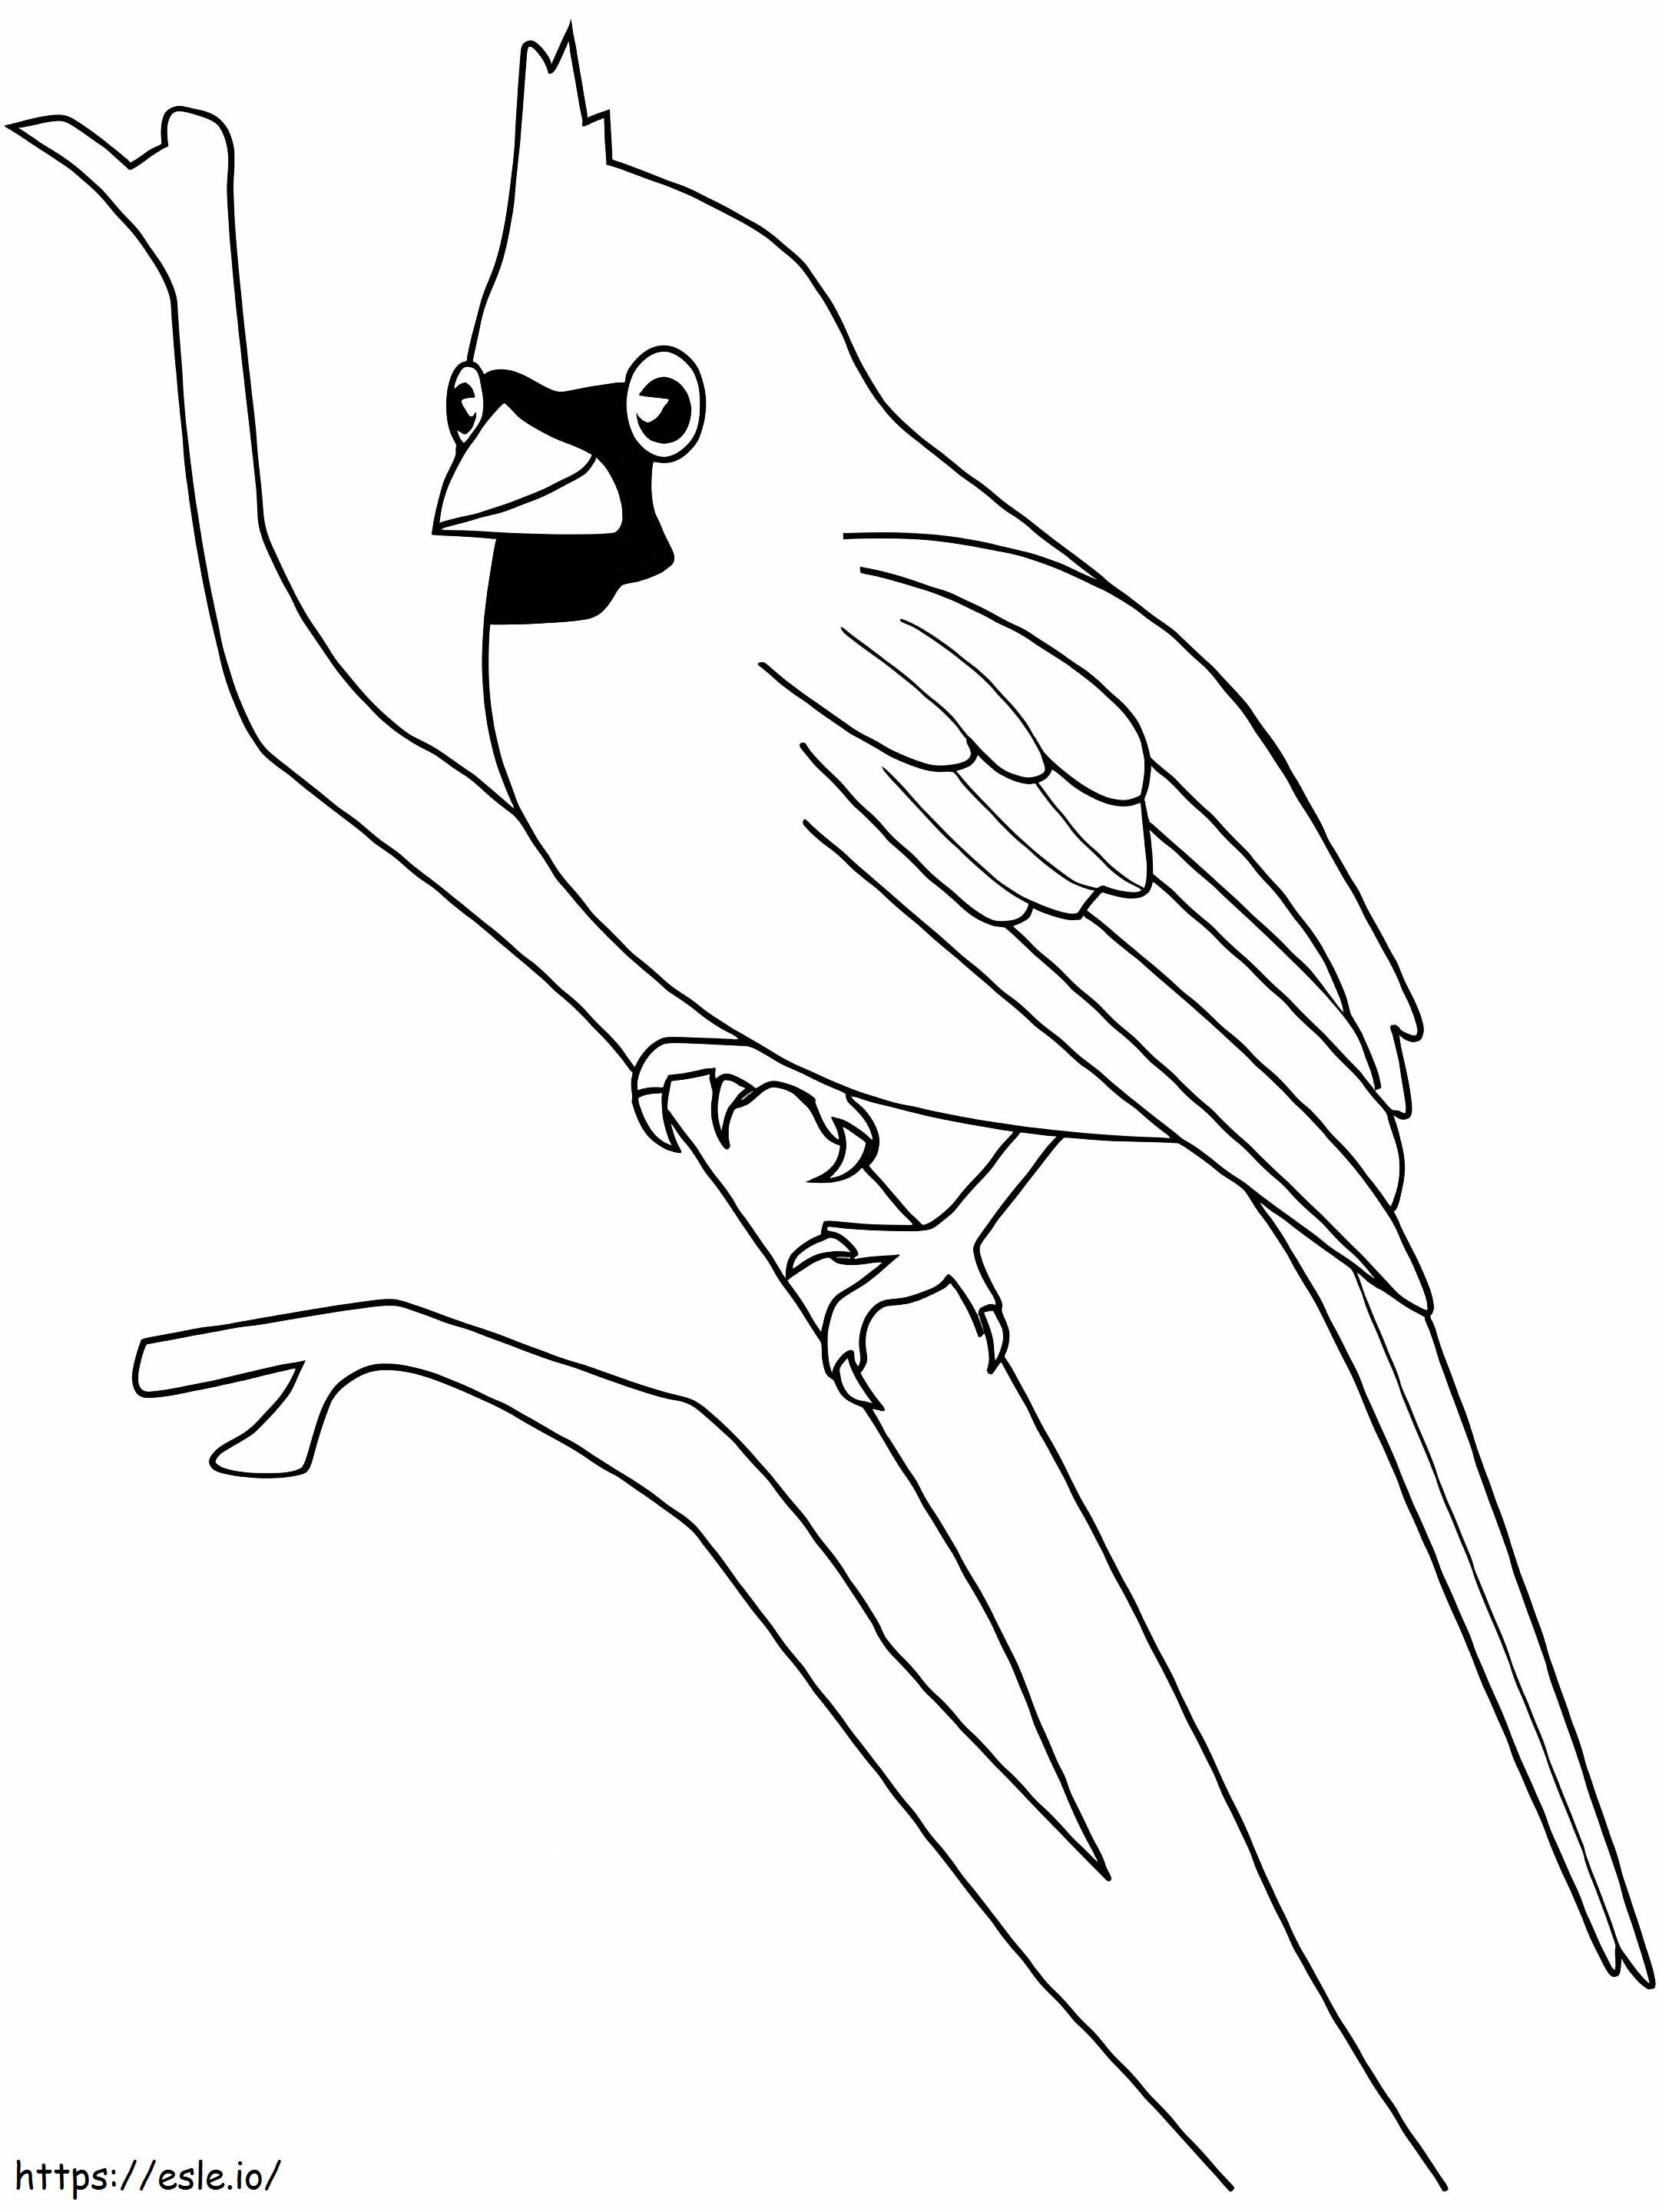 Cardinal On A Tree Branch coloring page